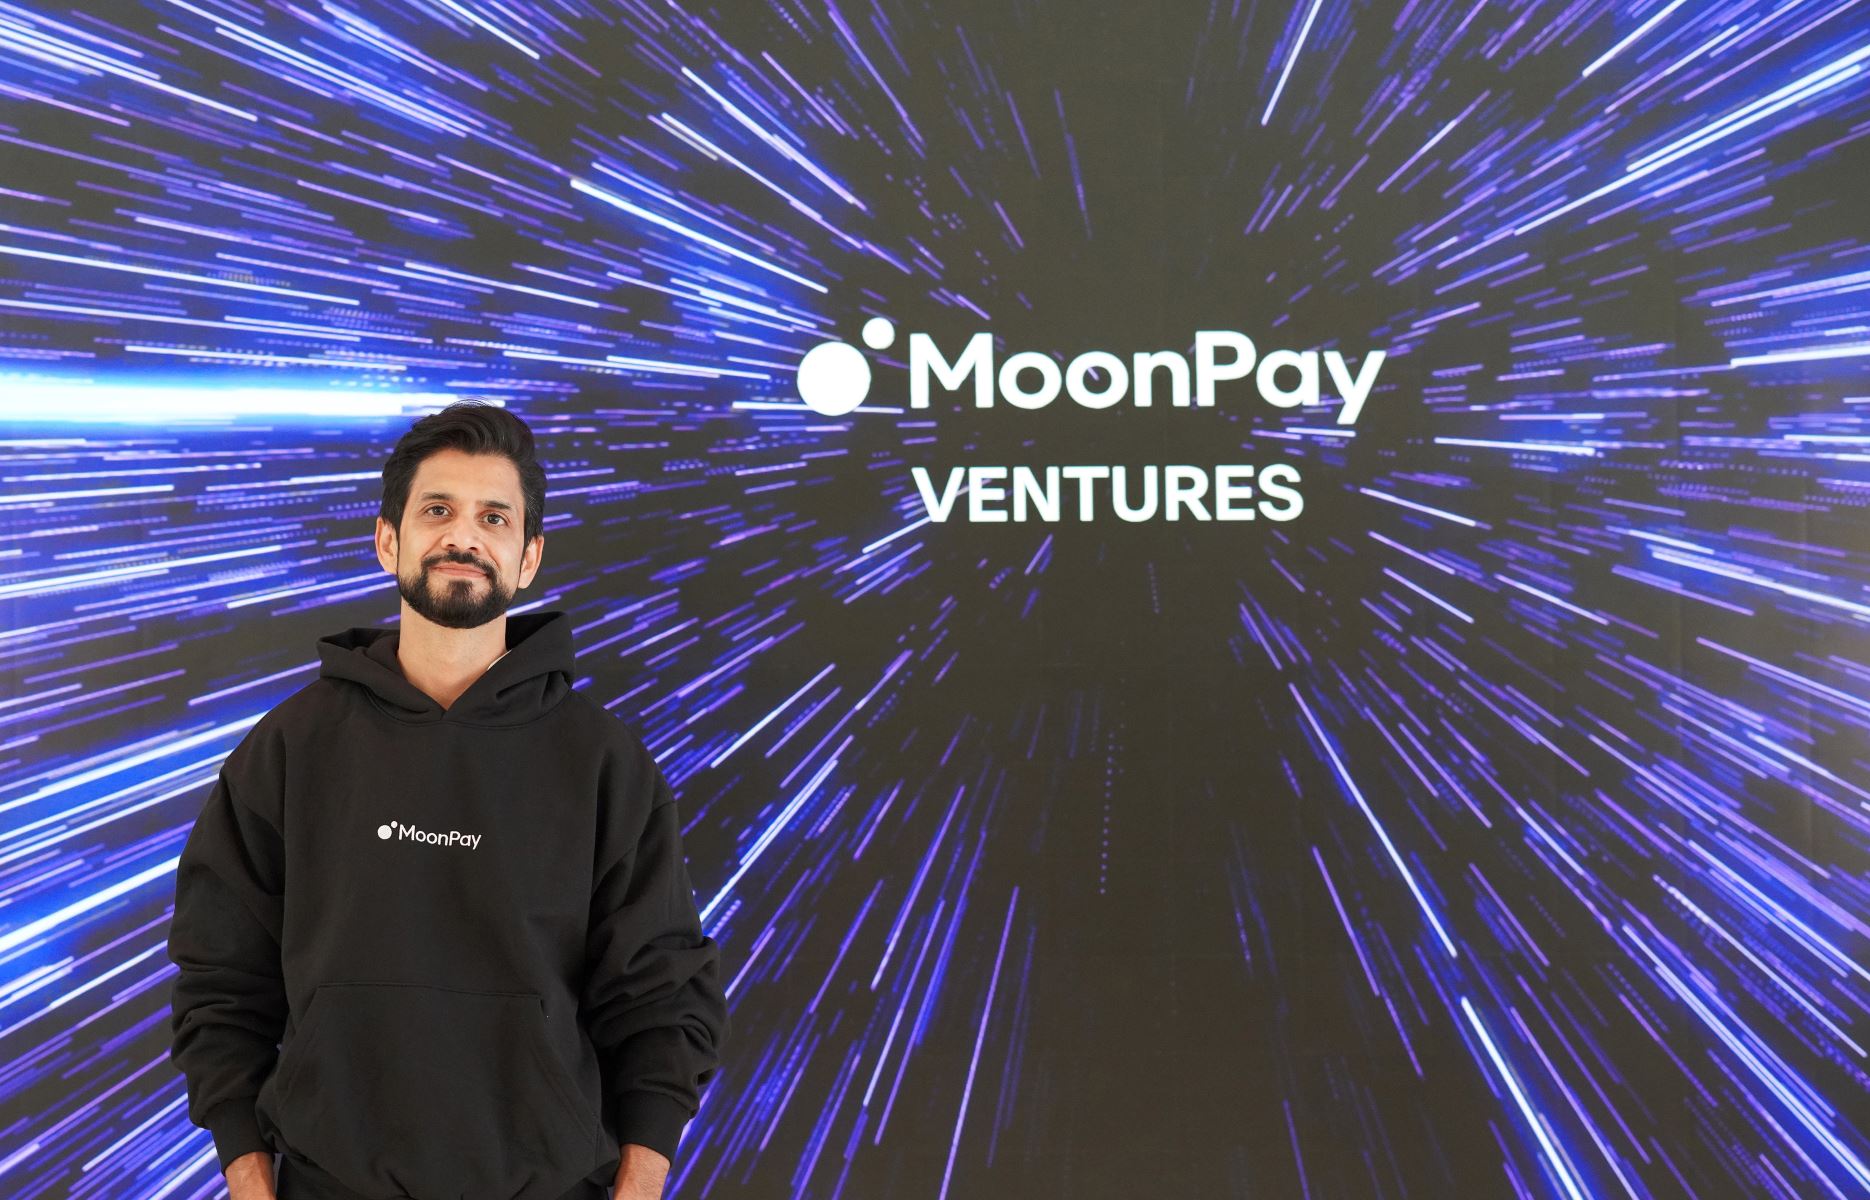 moonpay-launches-moonpay-ventures-to-fuel-web3-infra-gaming-and-fintech-startups